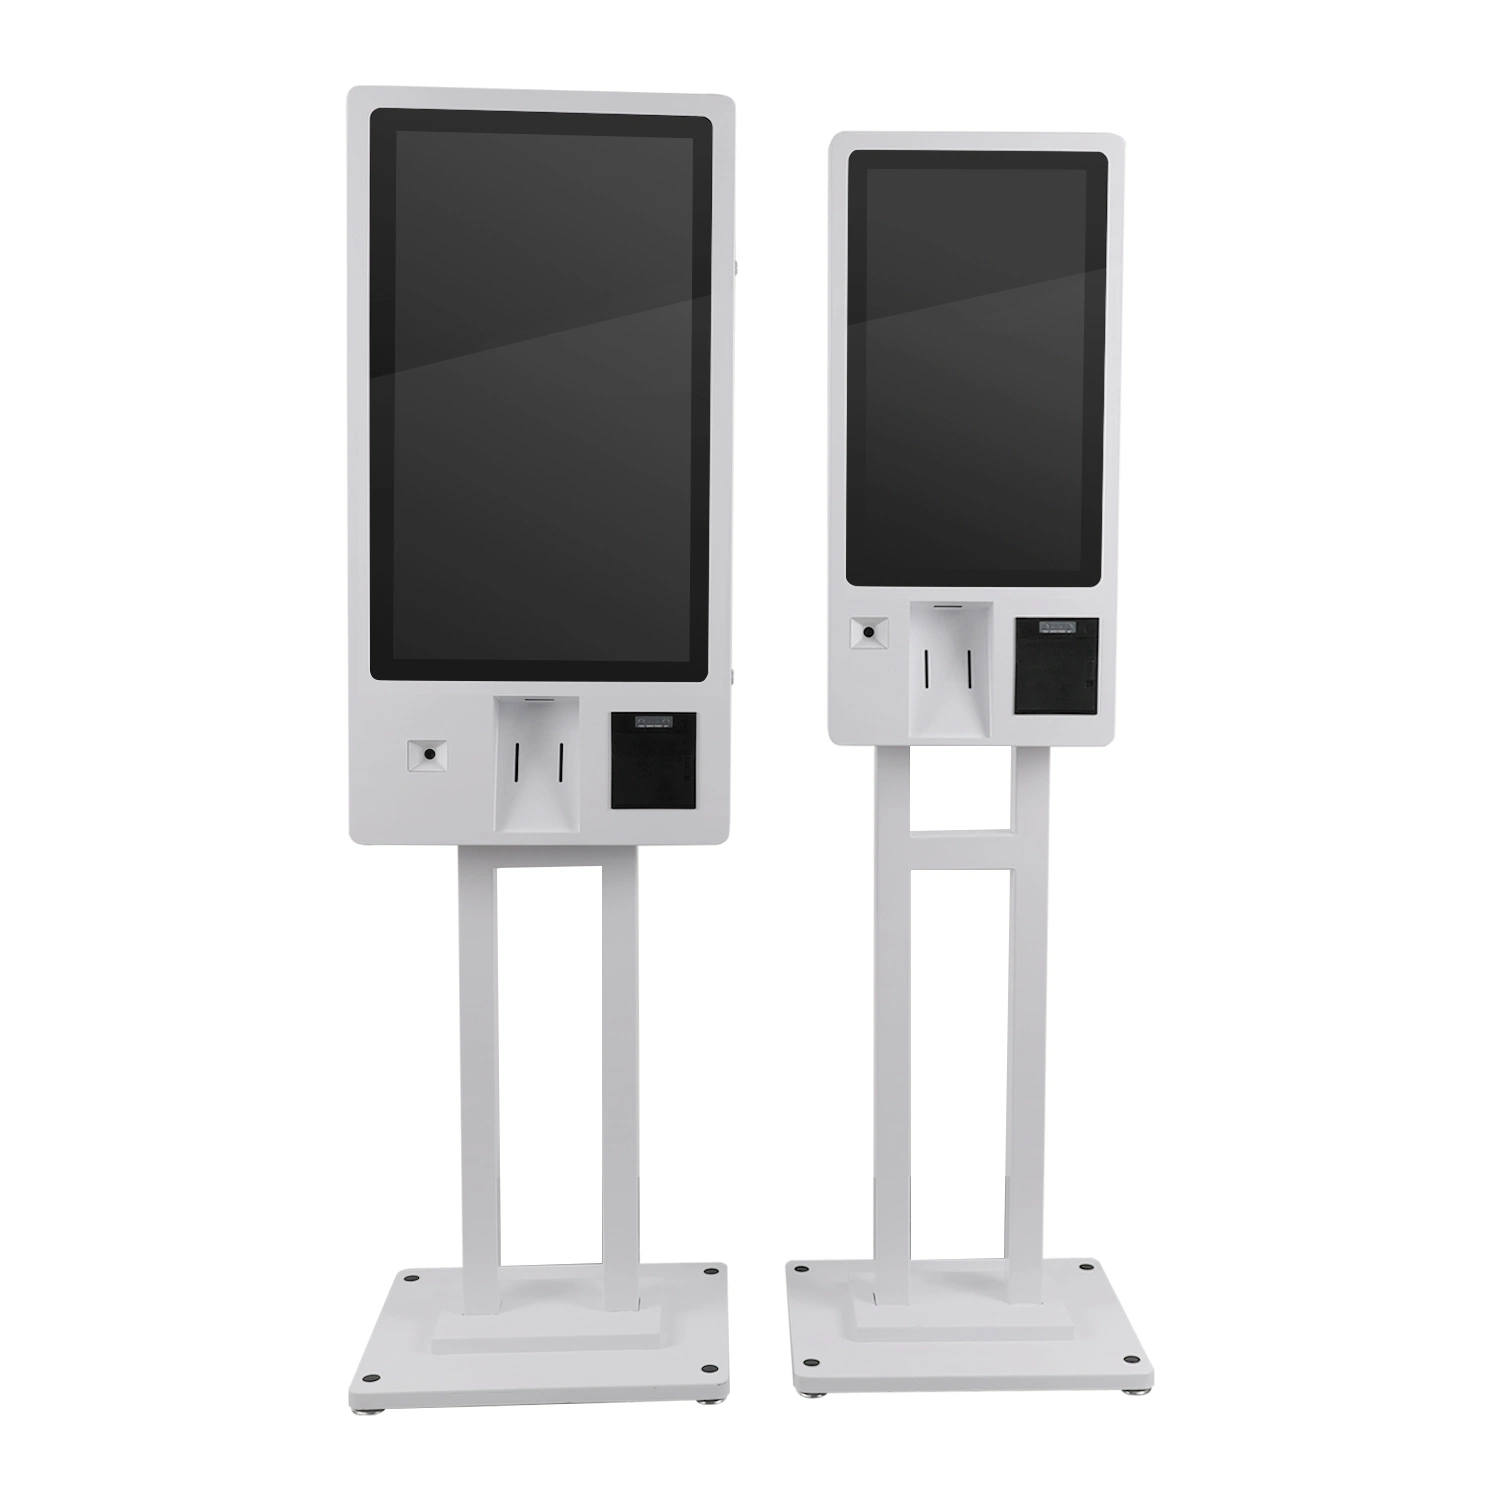 32 Inch Retail Kiosk POS Self Service Kiosk POS Solution Self Service Kiosk Touch Inquiry with Printer Scanner